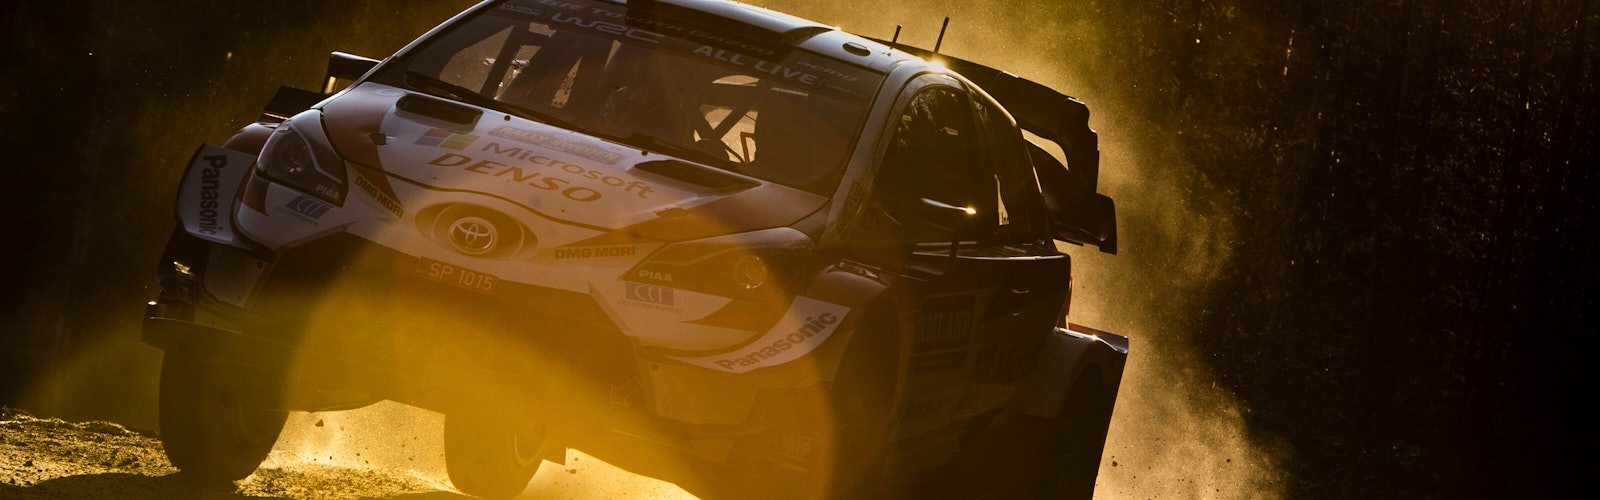 FIA World Rally Championship 2020 Stop 2 – Torsby, Sweden